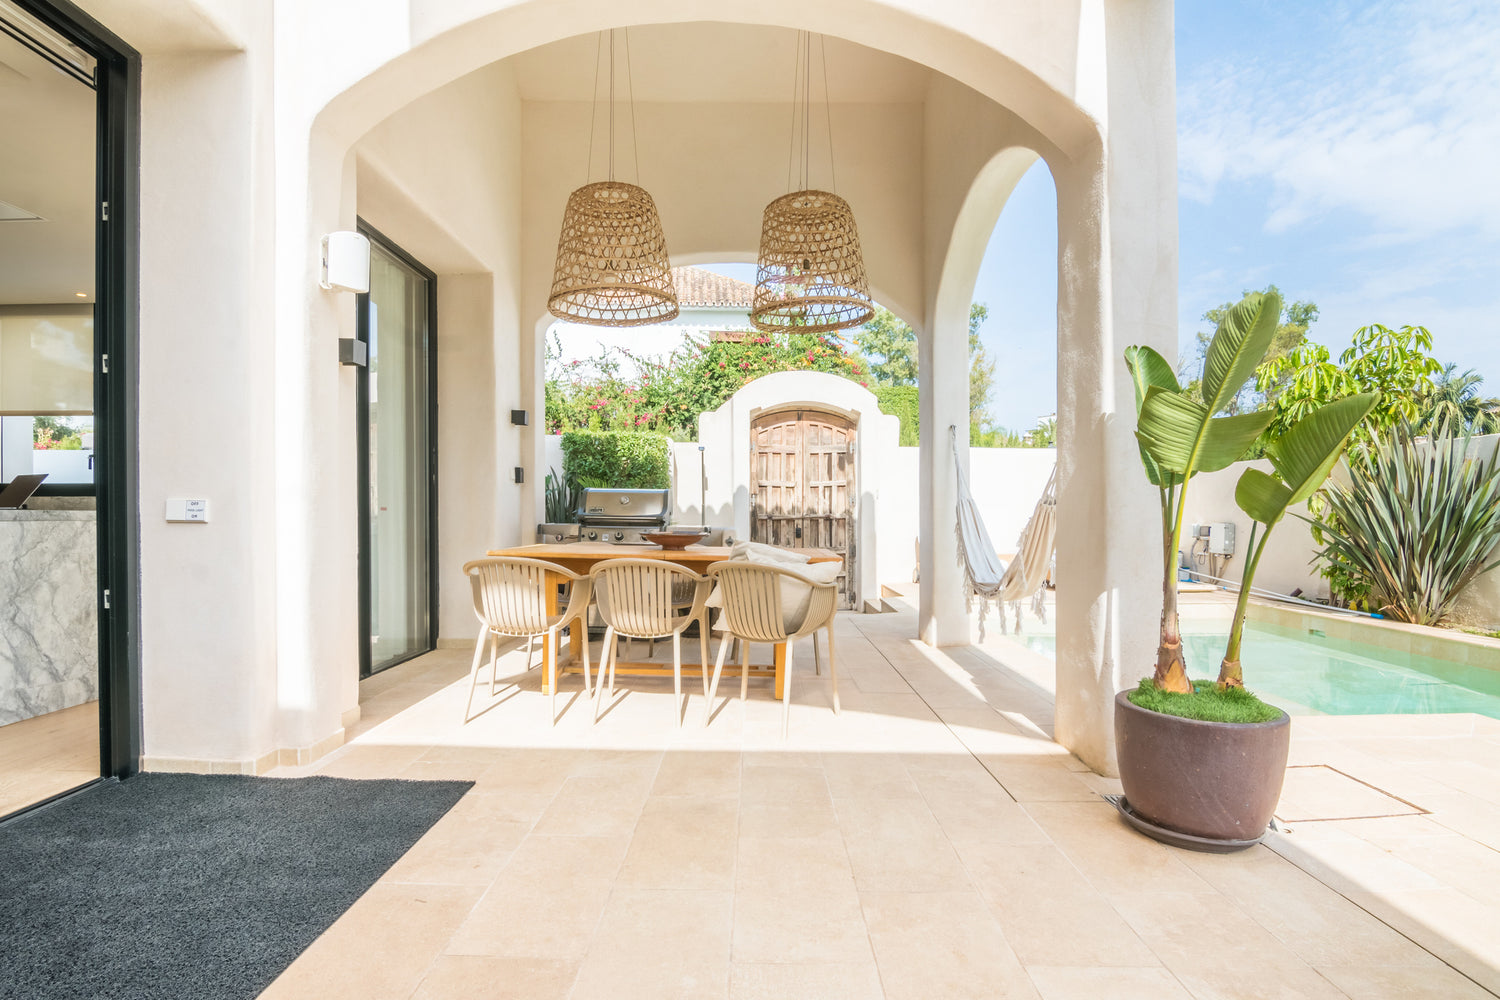 Exterior dinning area of Villa, Marbella luxury Beach House short term rental, located on the beach side at Marbella´s exclusive Golden Mile just by beach